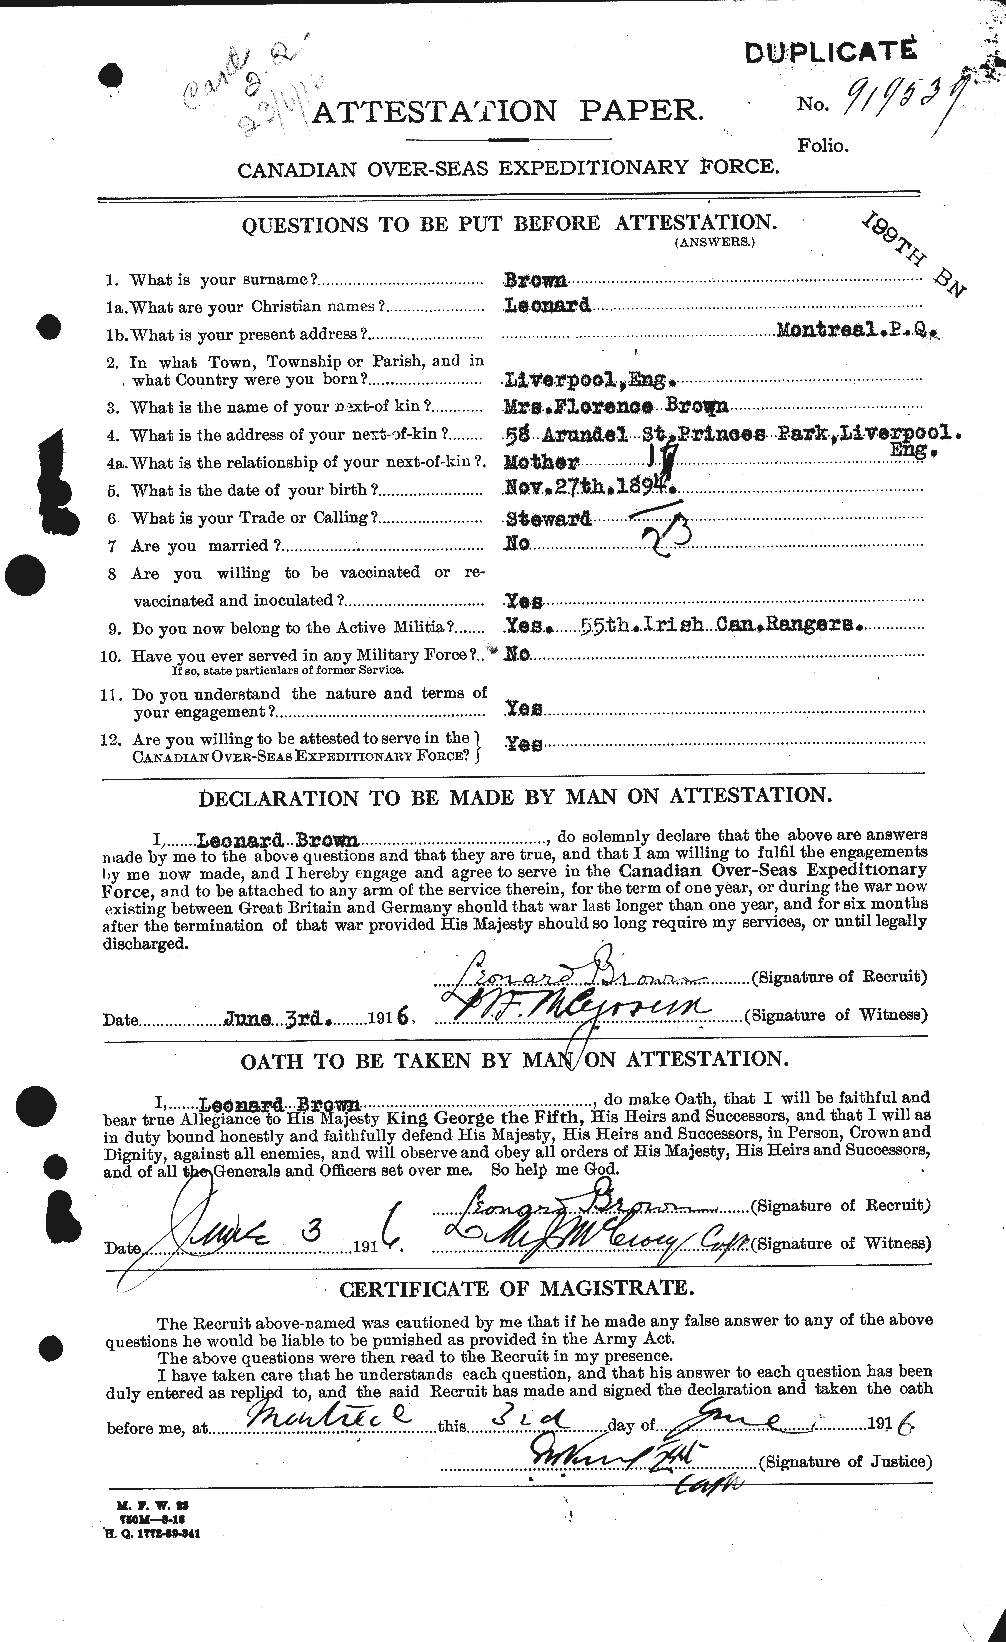 Personnel Records of the First World War - CEF 266287a